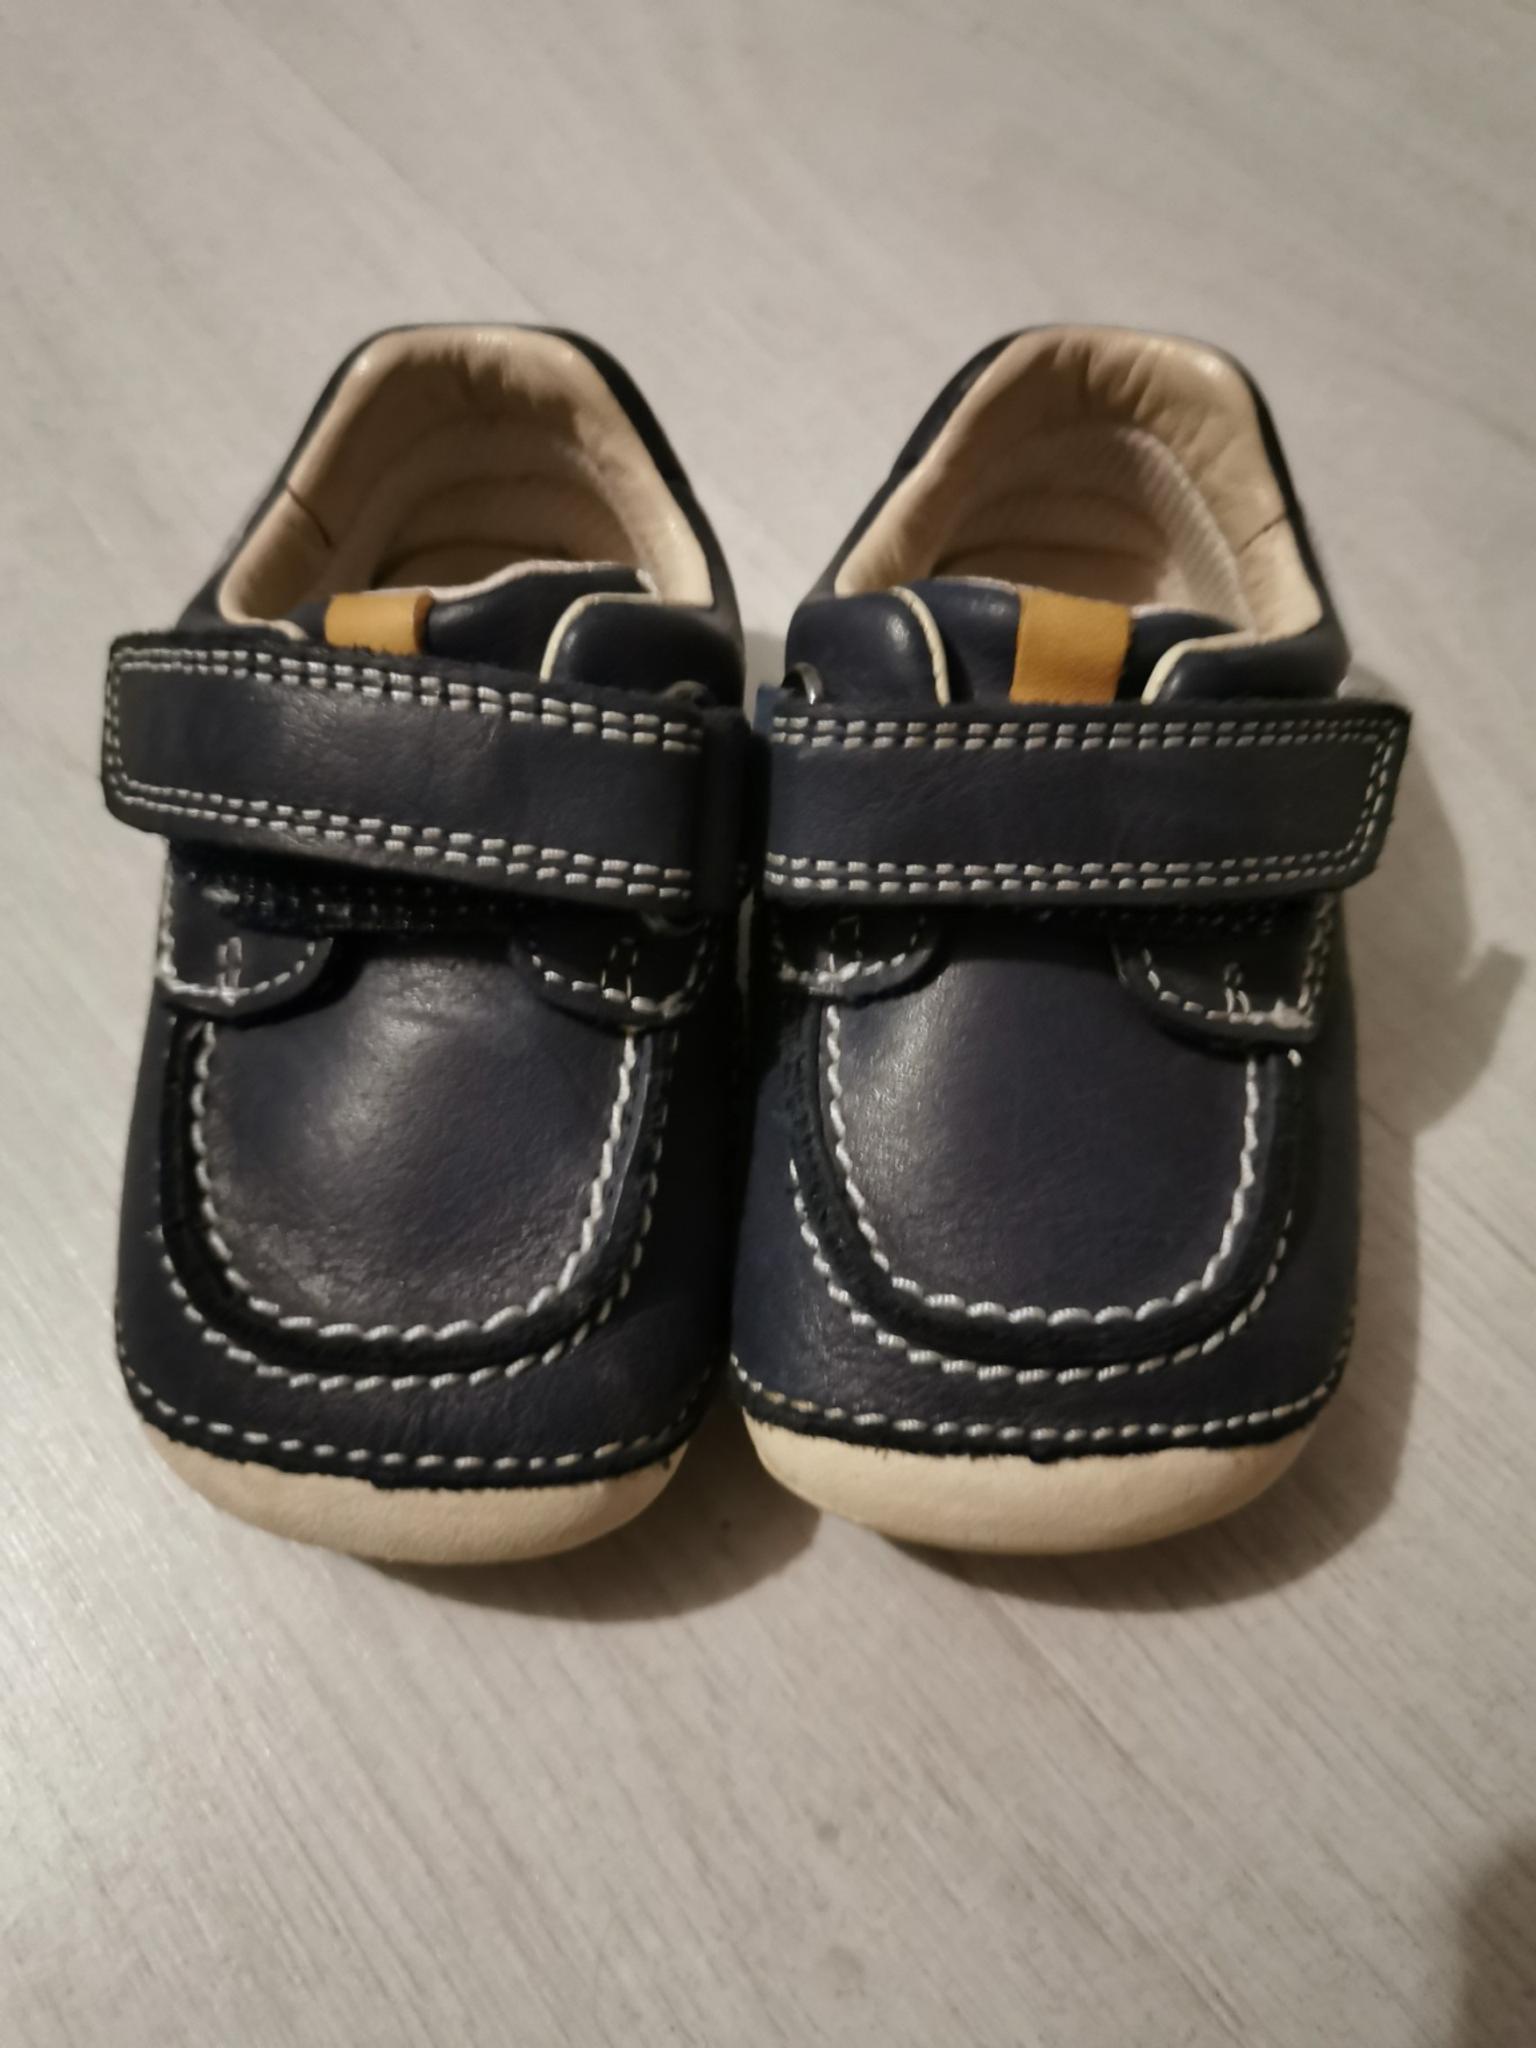 clarks first shoes sale